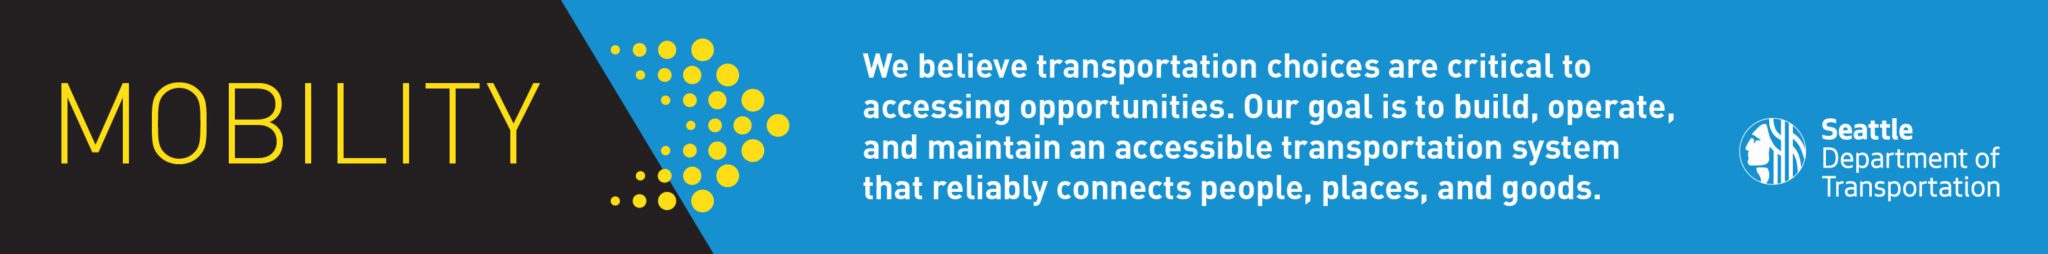 Mobility: We believe transportation choices are key to accessing opportunities.  Our goal is to build, operate and maintain an accessible transportation system that reliably connects people, places and goods.